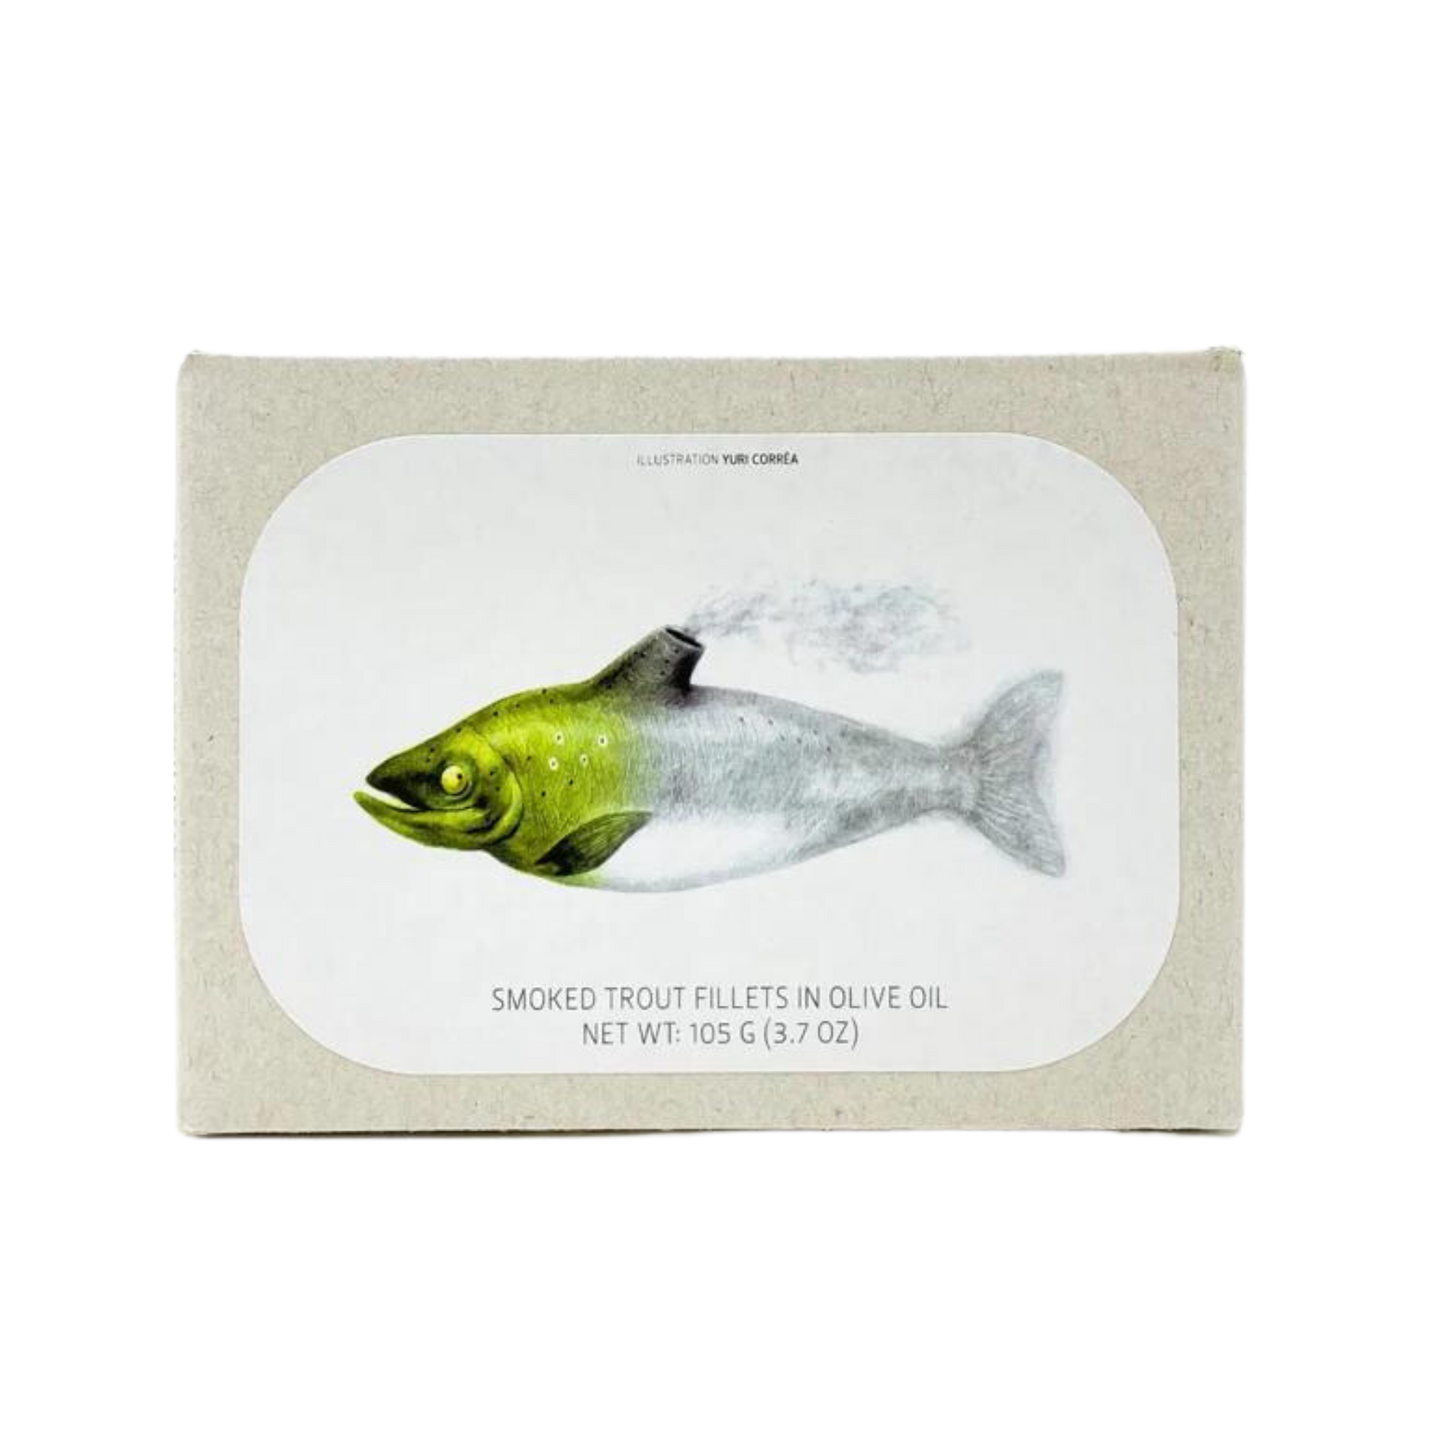 José Gourmet Smoked Trout Fillets in Olive Oil